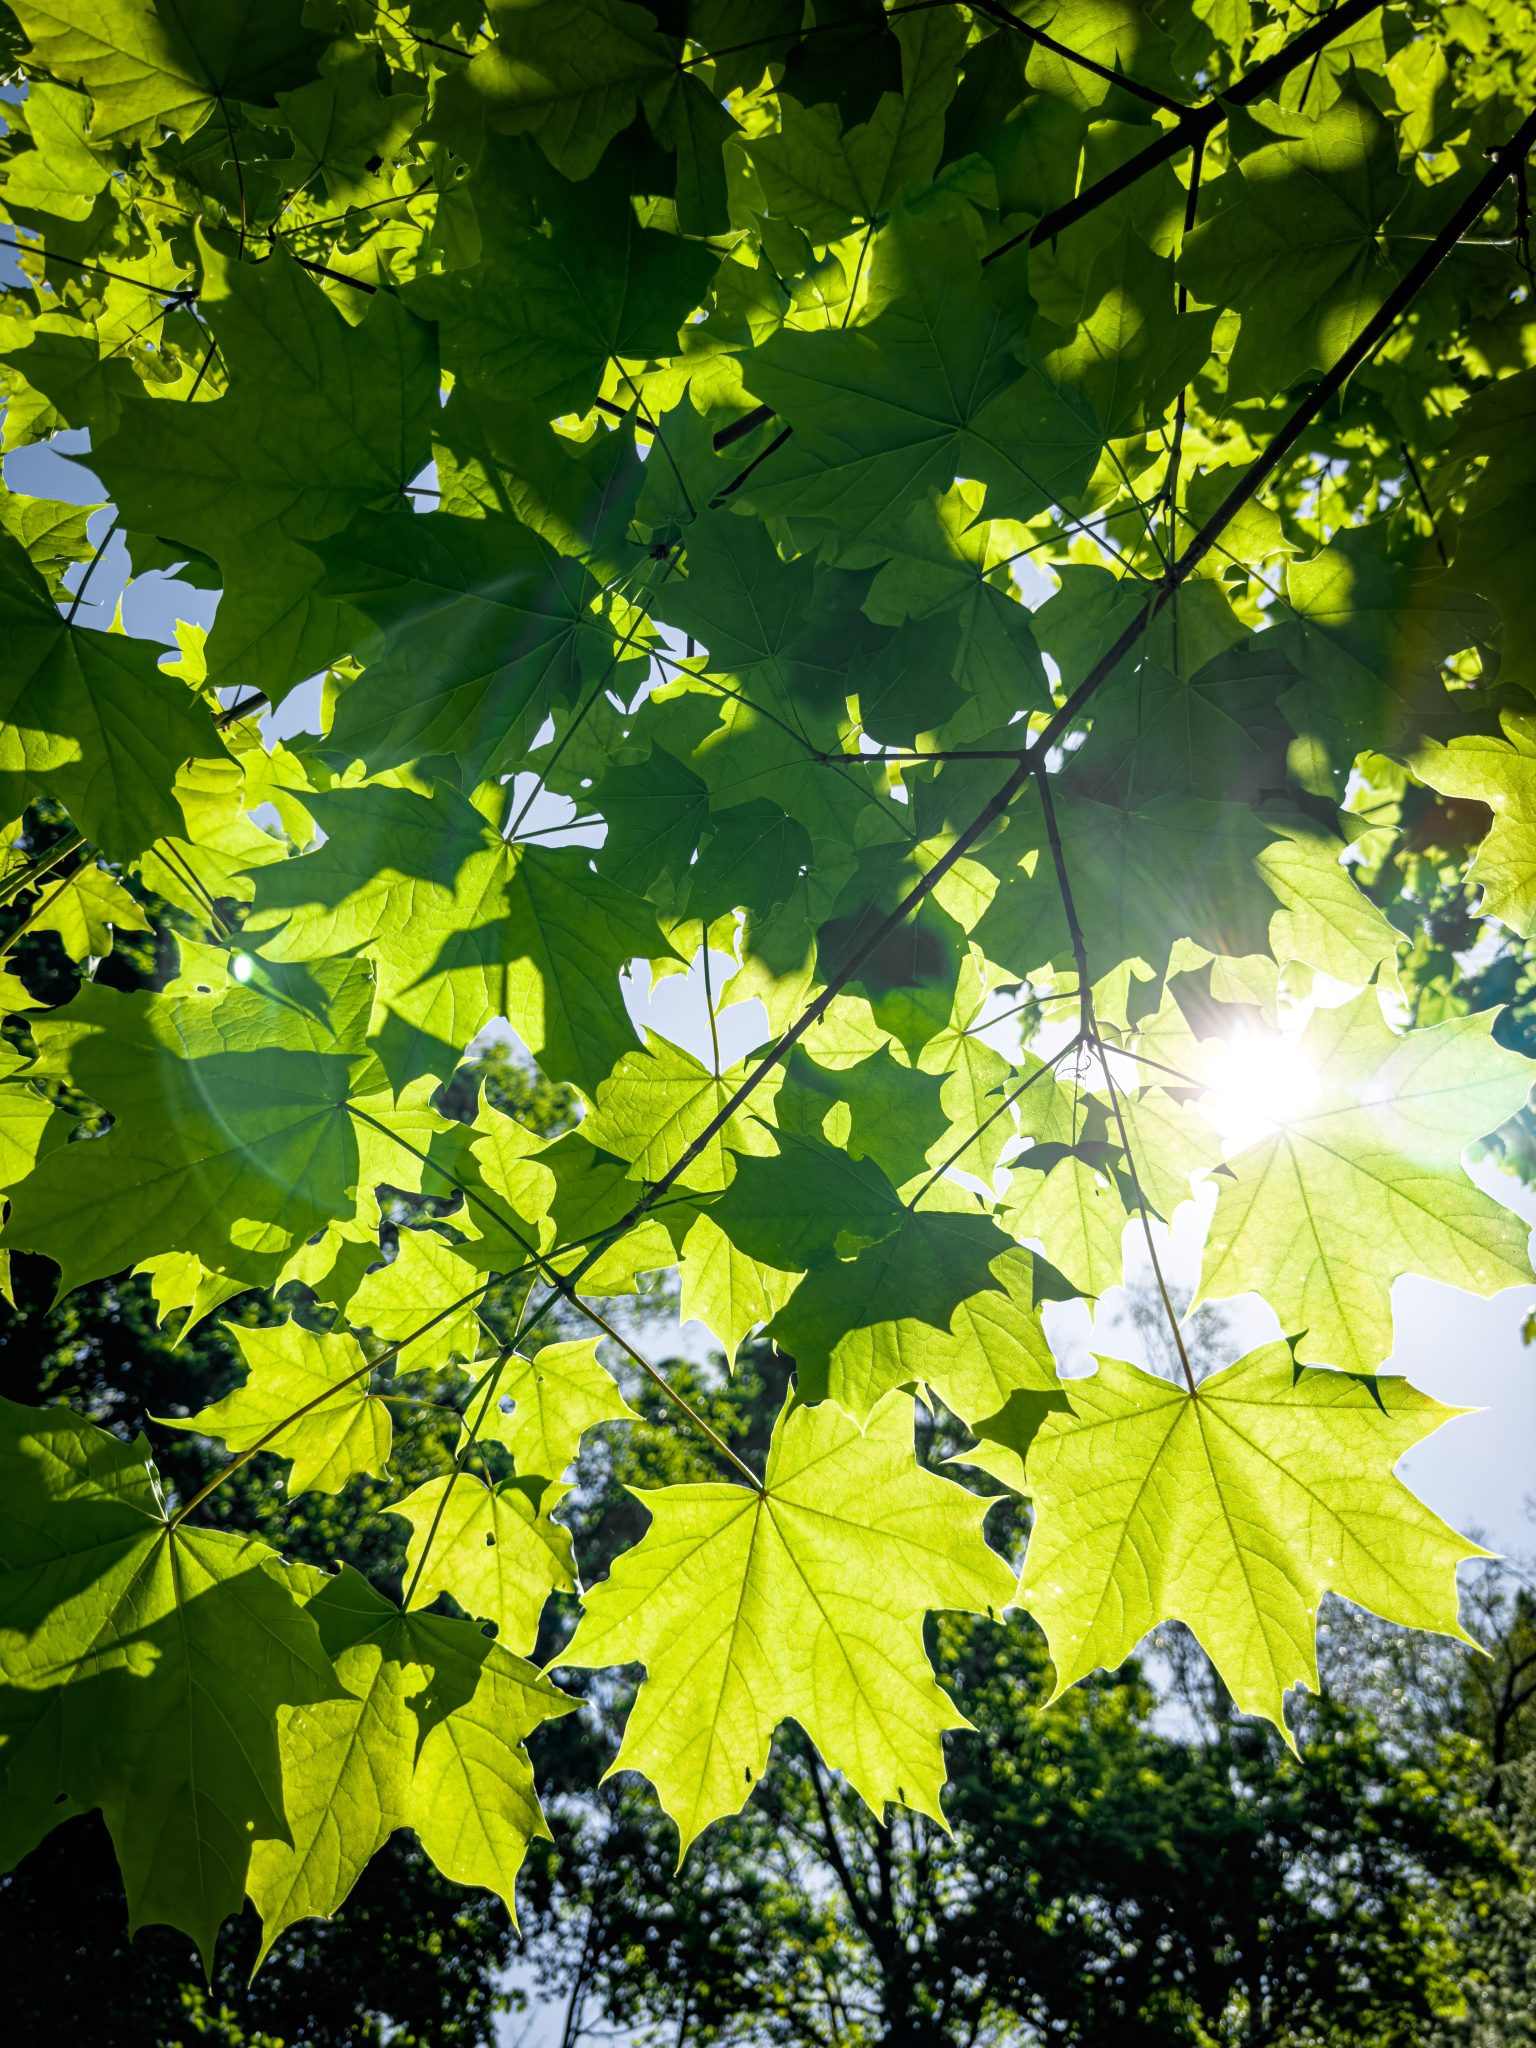 View from below of maple leaves with veins distinctly visible against a backdrop of a bright sky. Sunlight shines through.